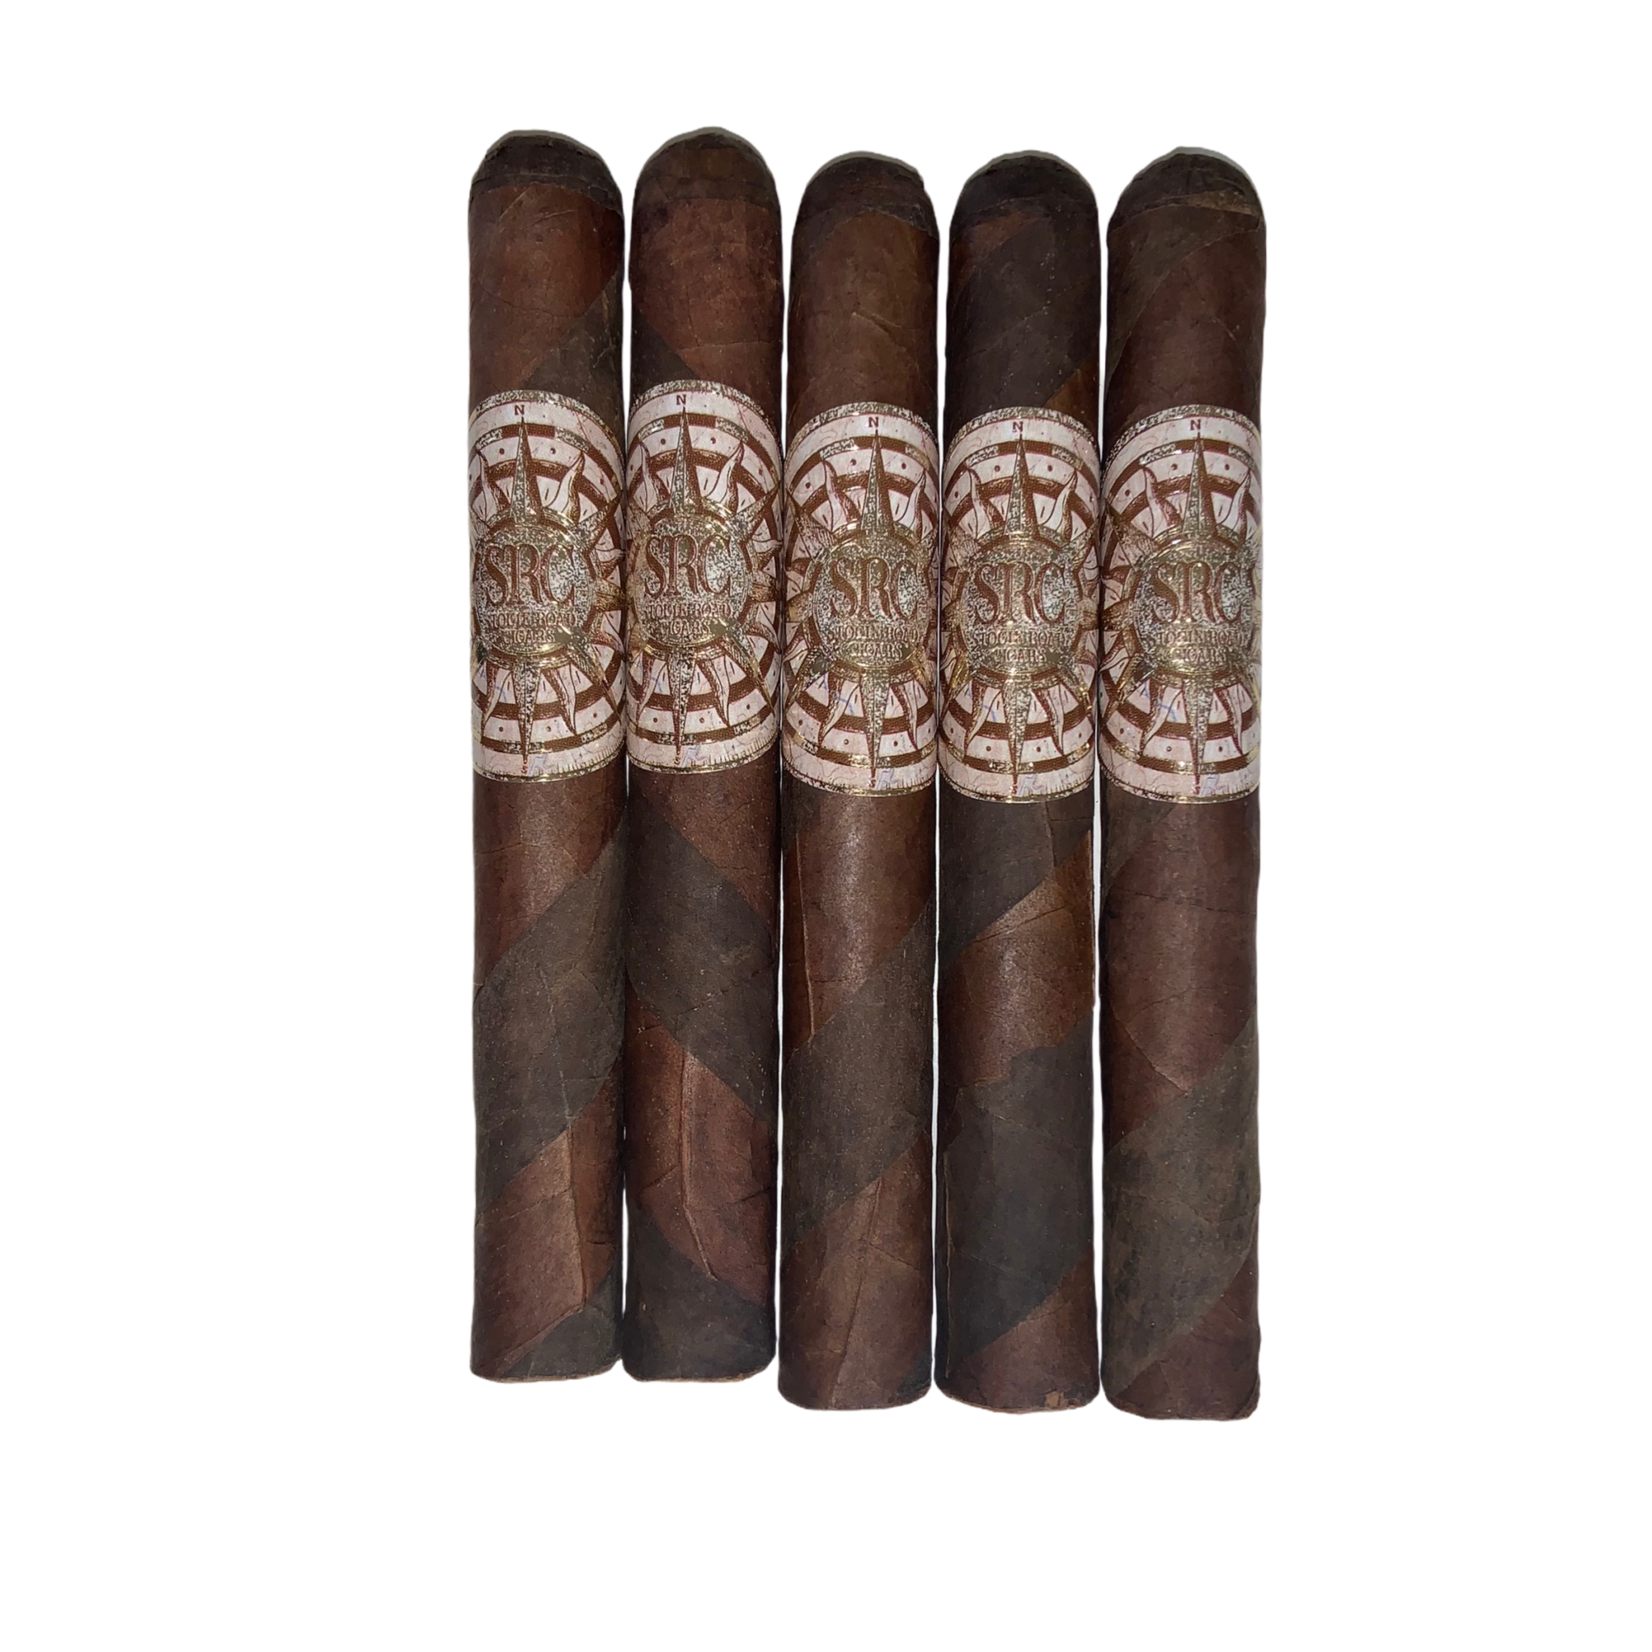 Stogie Road Cigars Big Tony by Stogie Road